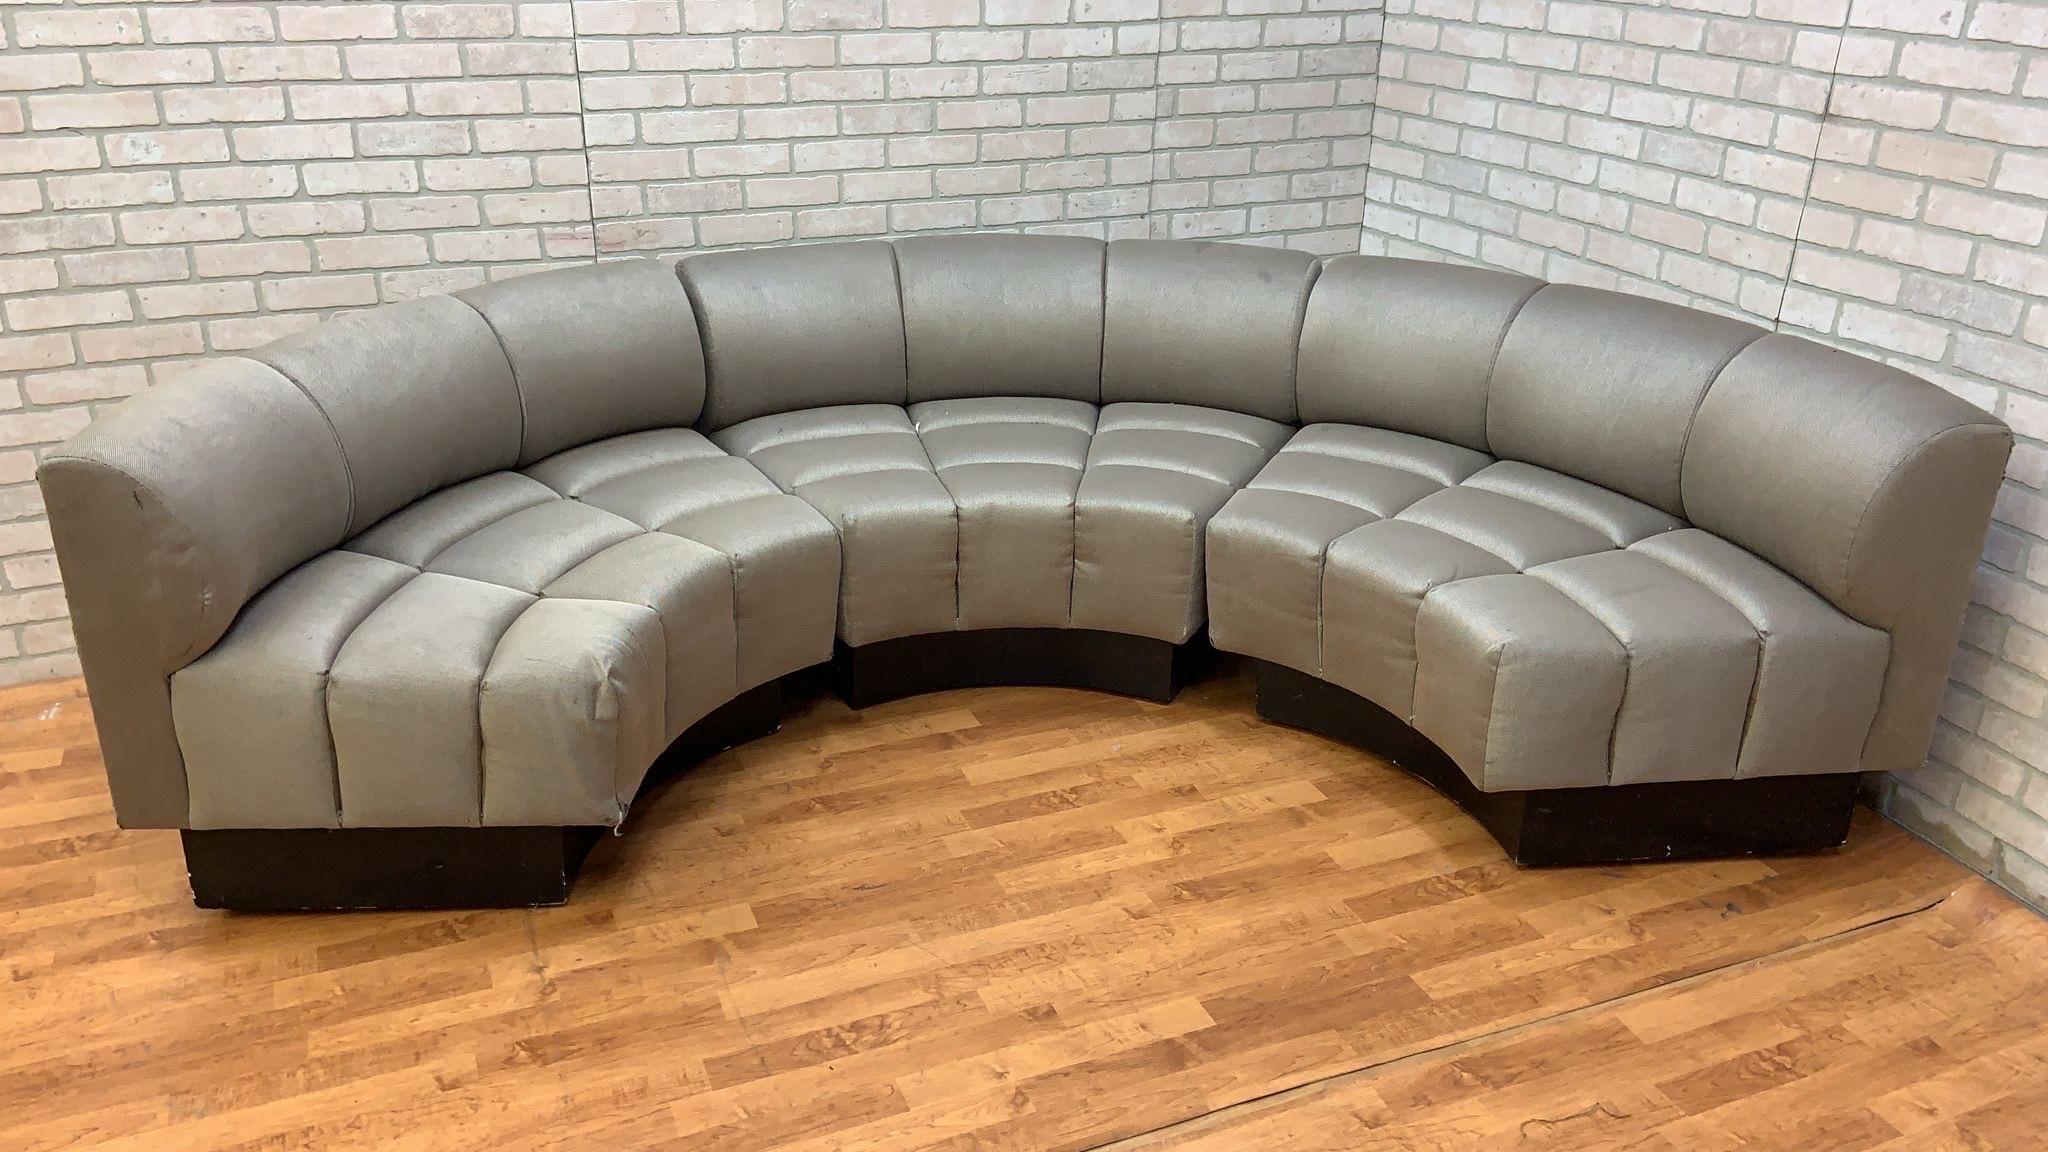 Vintage Custom Channel Back Modular Wedge Circular Sectional Lounge Sofa In Good Condition For Sale In Chicago, IL